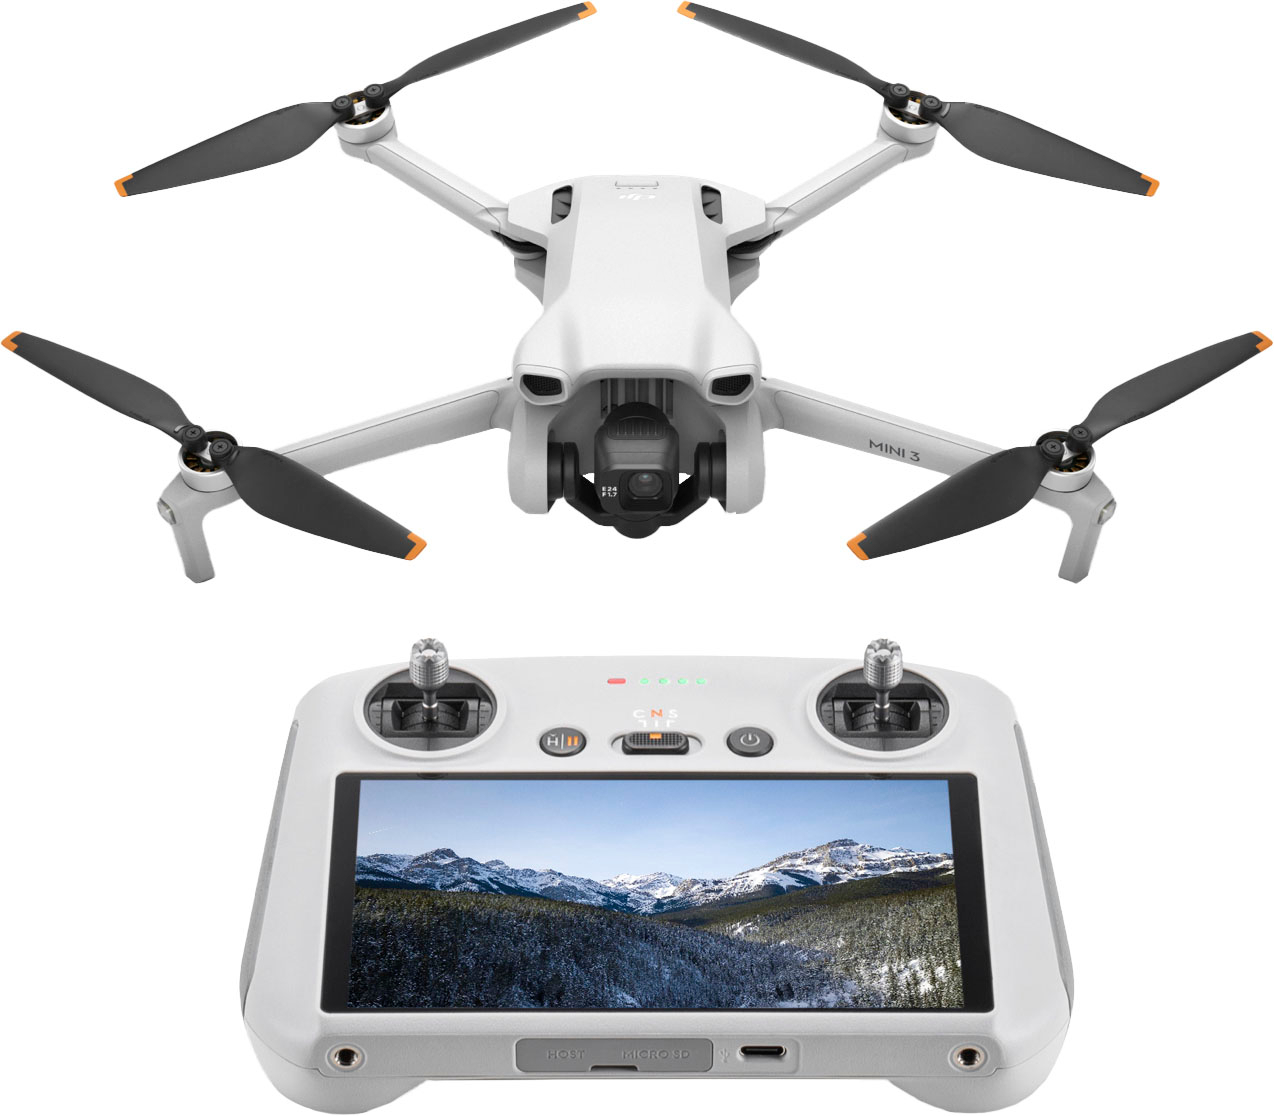 0190021074545 - DJI - MINI 3 DRONE AND REMOTE CONTROL WITH BUILT-IN SCREEN - GRAY